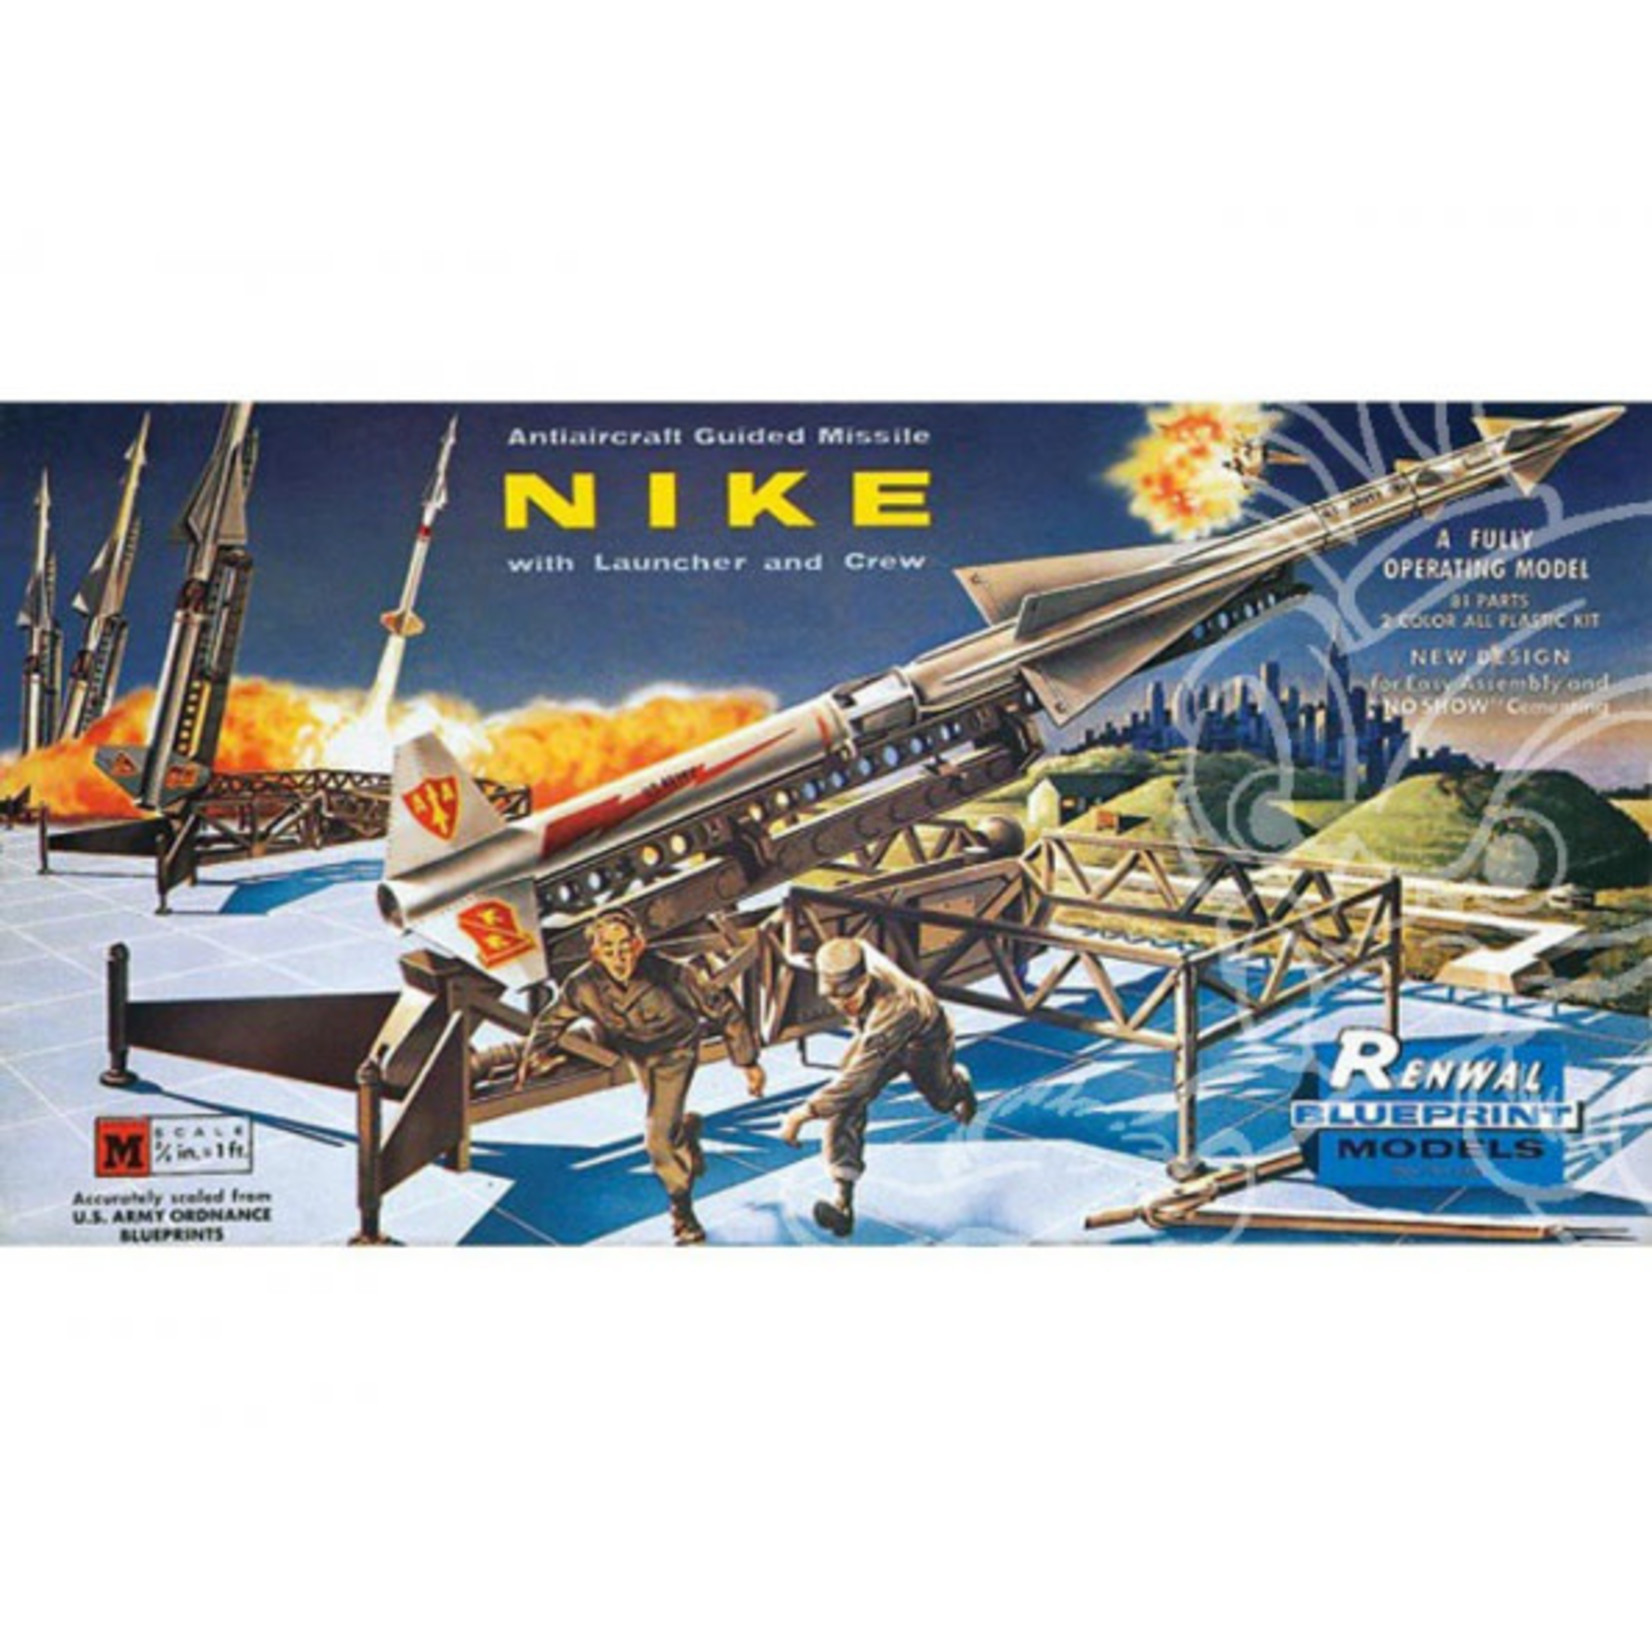 vergeetachtig Verklaring Behandeling Renwall Antiaircraft Guided Missile Nike with launcher and crew 1/32  85-7815 - Hobby Action Chandler